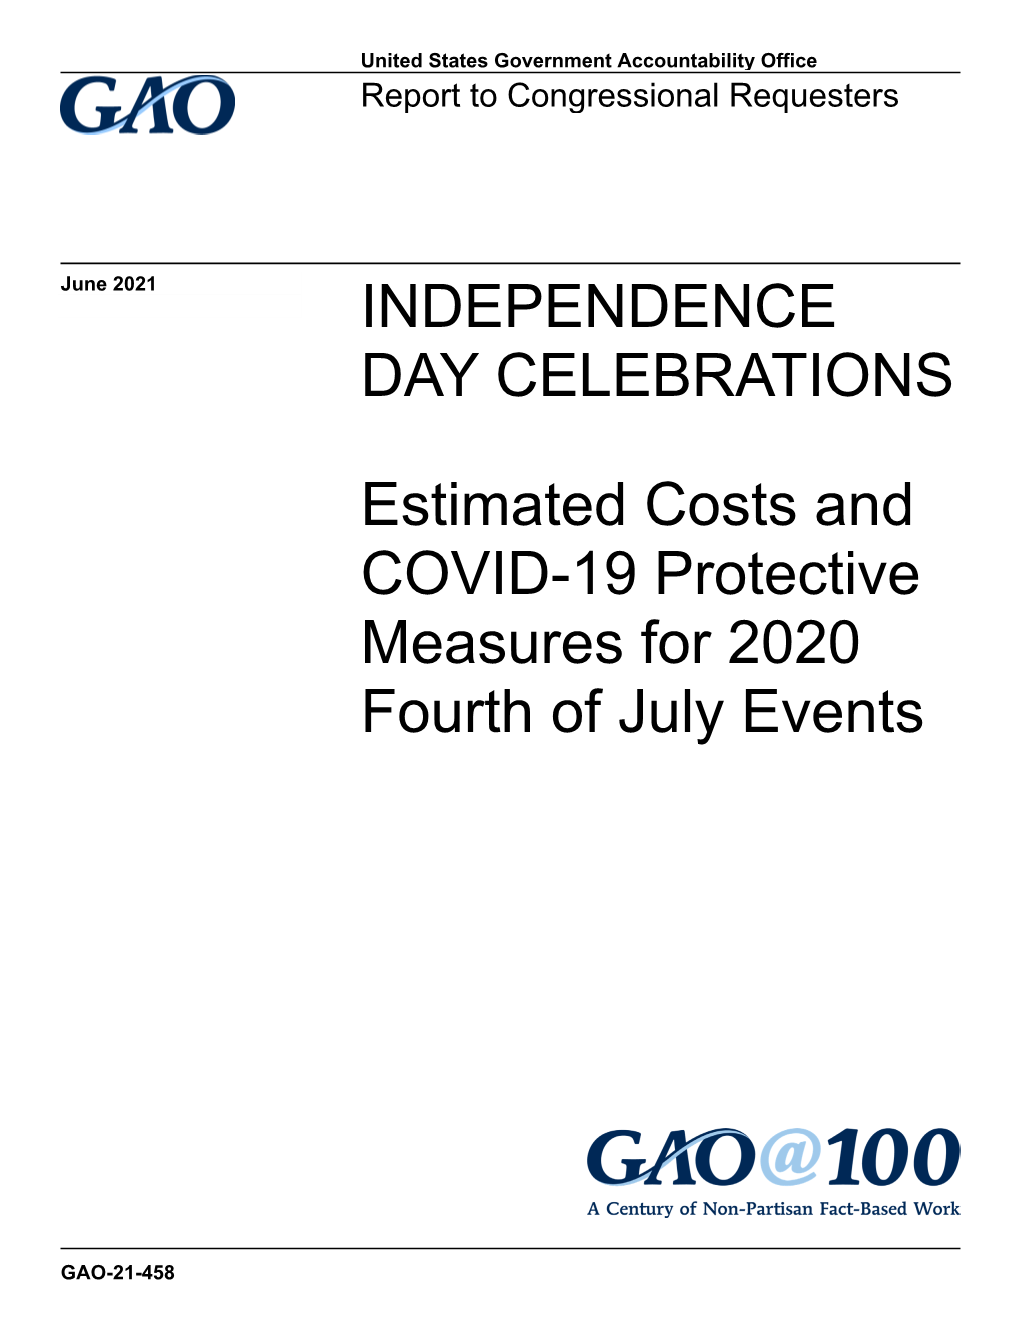 GAO-21-458, INDEPENDENCE DAY CELEBRATIONS: Estimated Costs